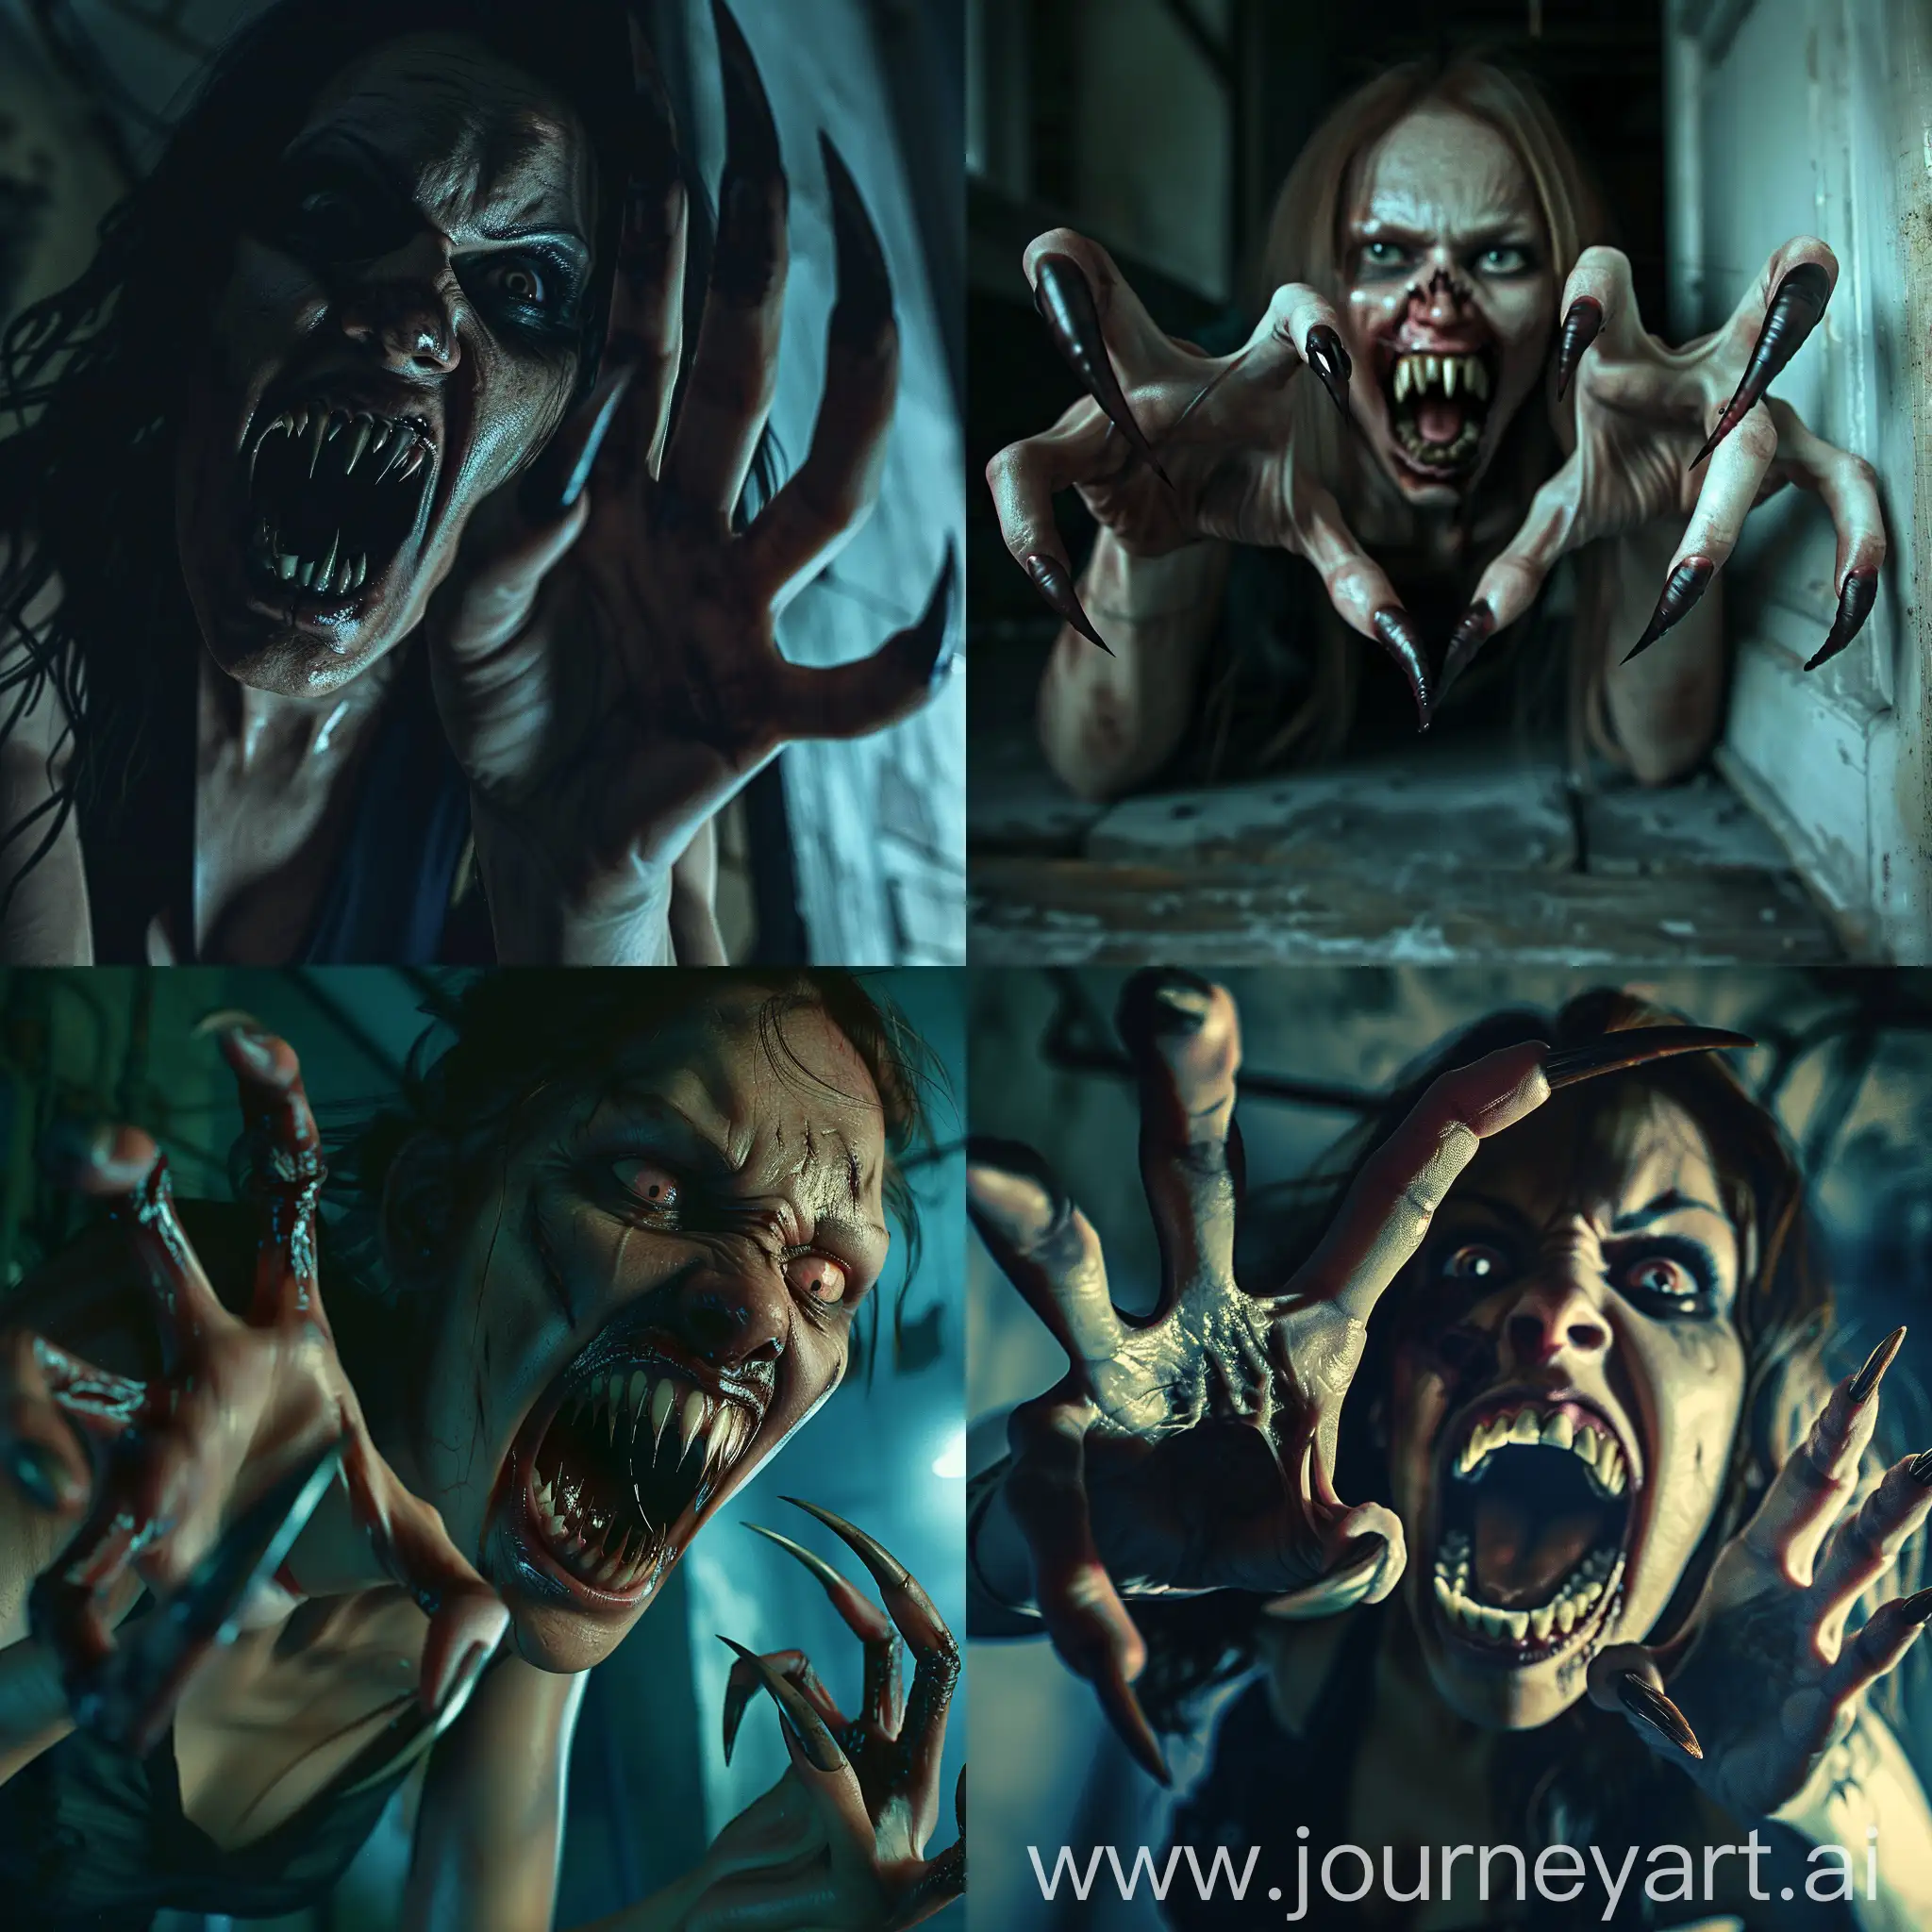 A Terrible Zombie woman with long curved pointed nails protruding from her fingers like menacing claws, she looks like a who has climbed out of the grave, her mouth is threateningly open exposing pointed teeth resembling fangs, The scene takes place at night, in an abandoned building, hyper-realism, cinematic, high detail, photo detailing, high quality, photorealistic, terrifying, aggressive, sharp teeth-fangs, dark atmosphere, realistic detailed, detailed nails, atmospheric lighting.
